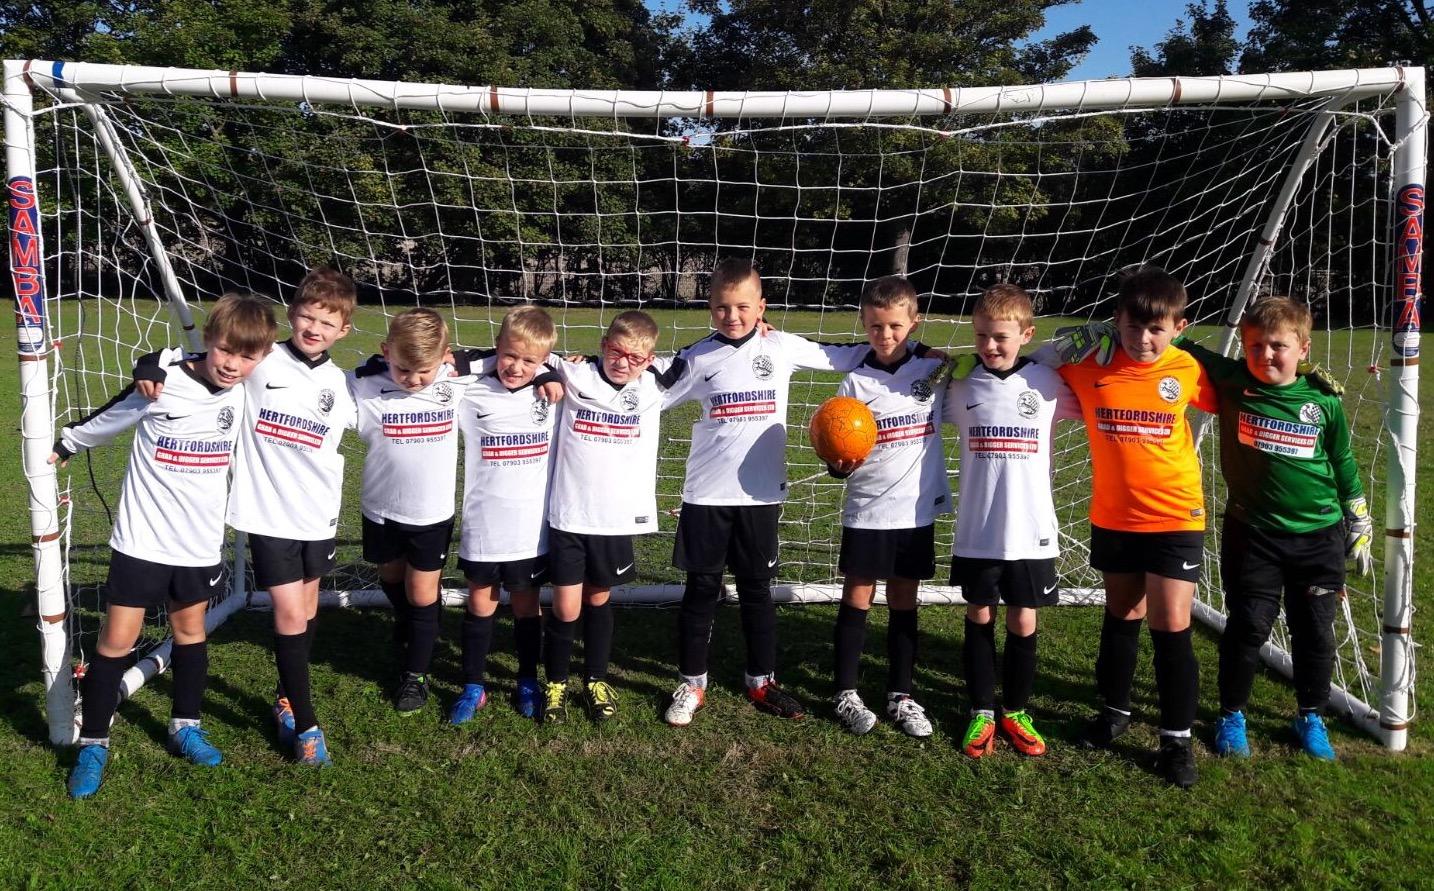 Our Under 9's team - The Falcons